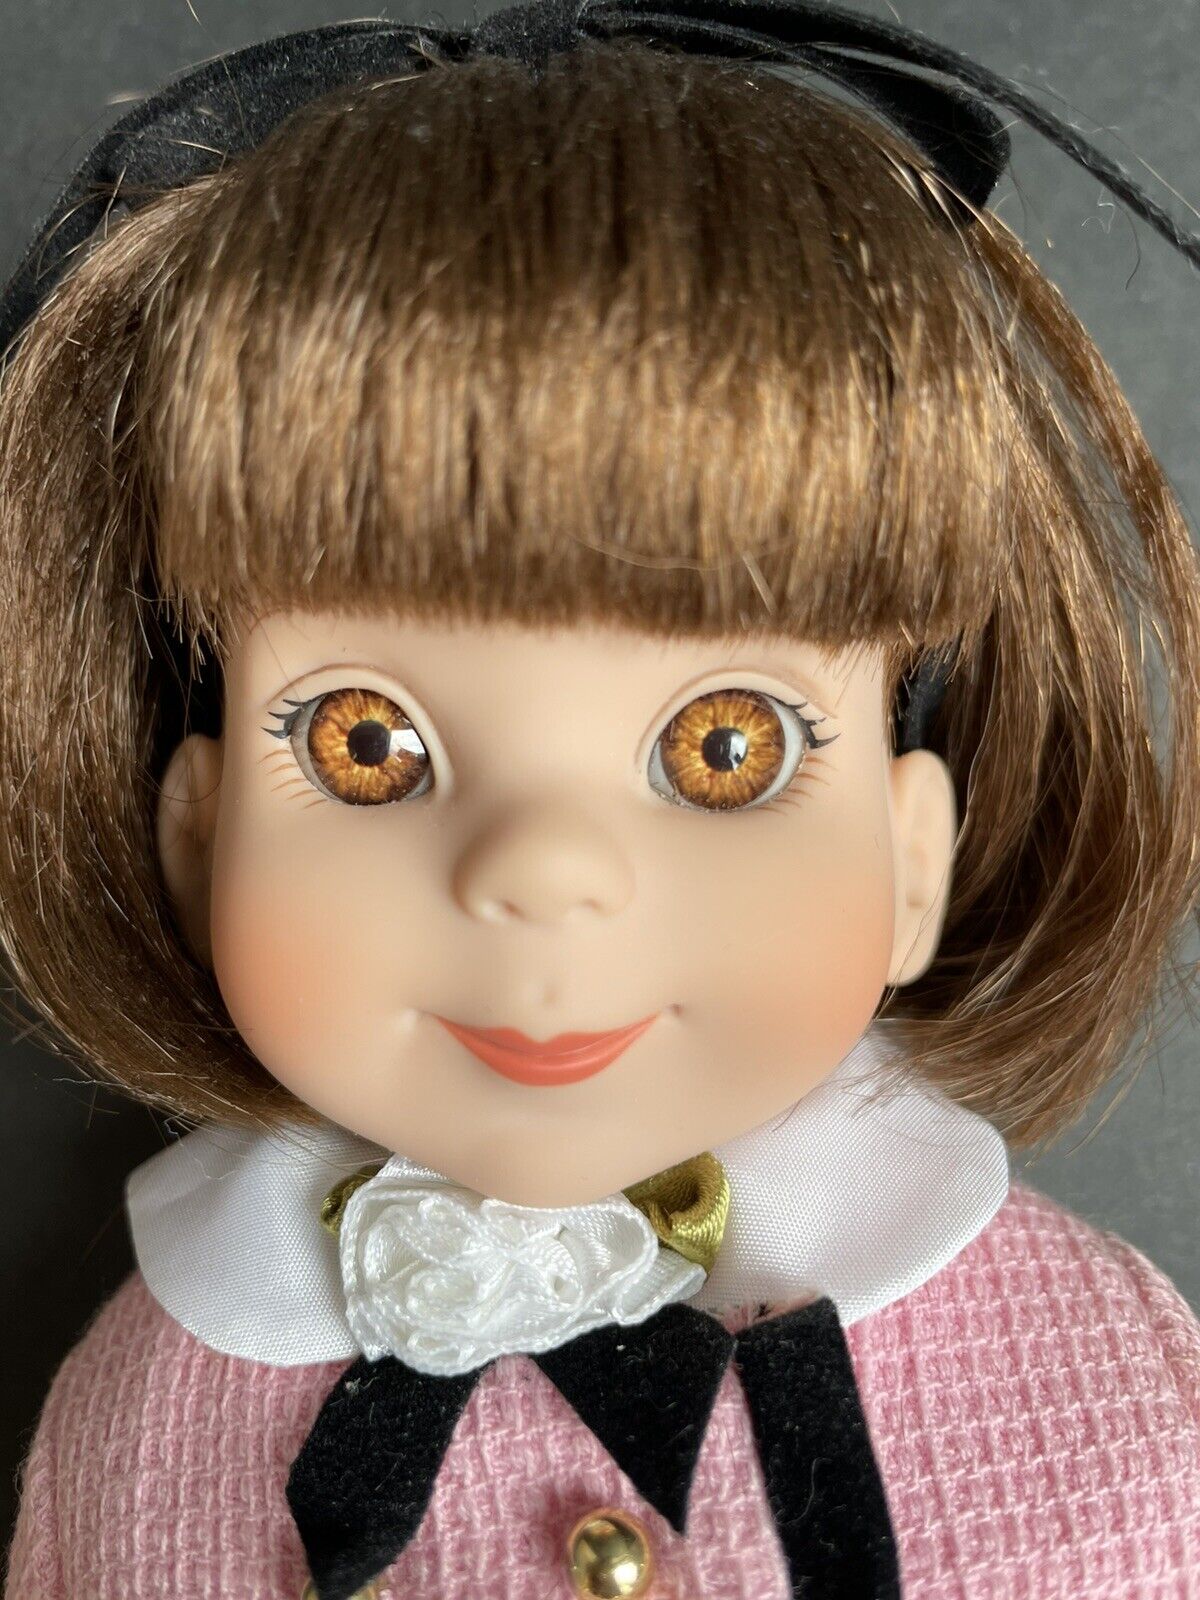 Collectible Tonner Vinyl Betsy McCall “Perfectly Suited” Doll with Tag